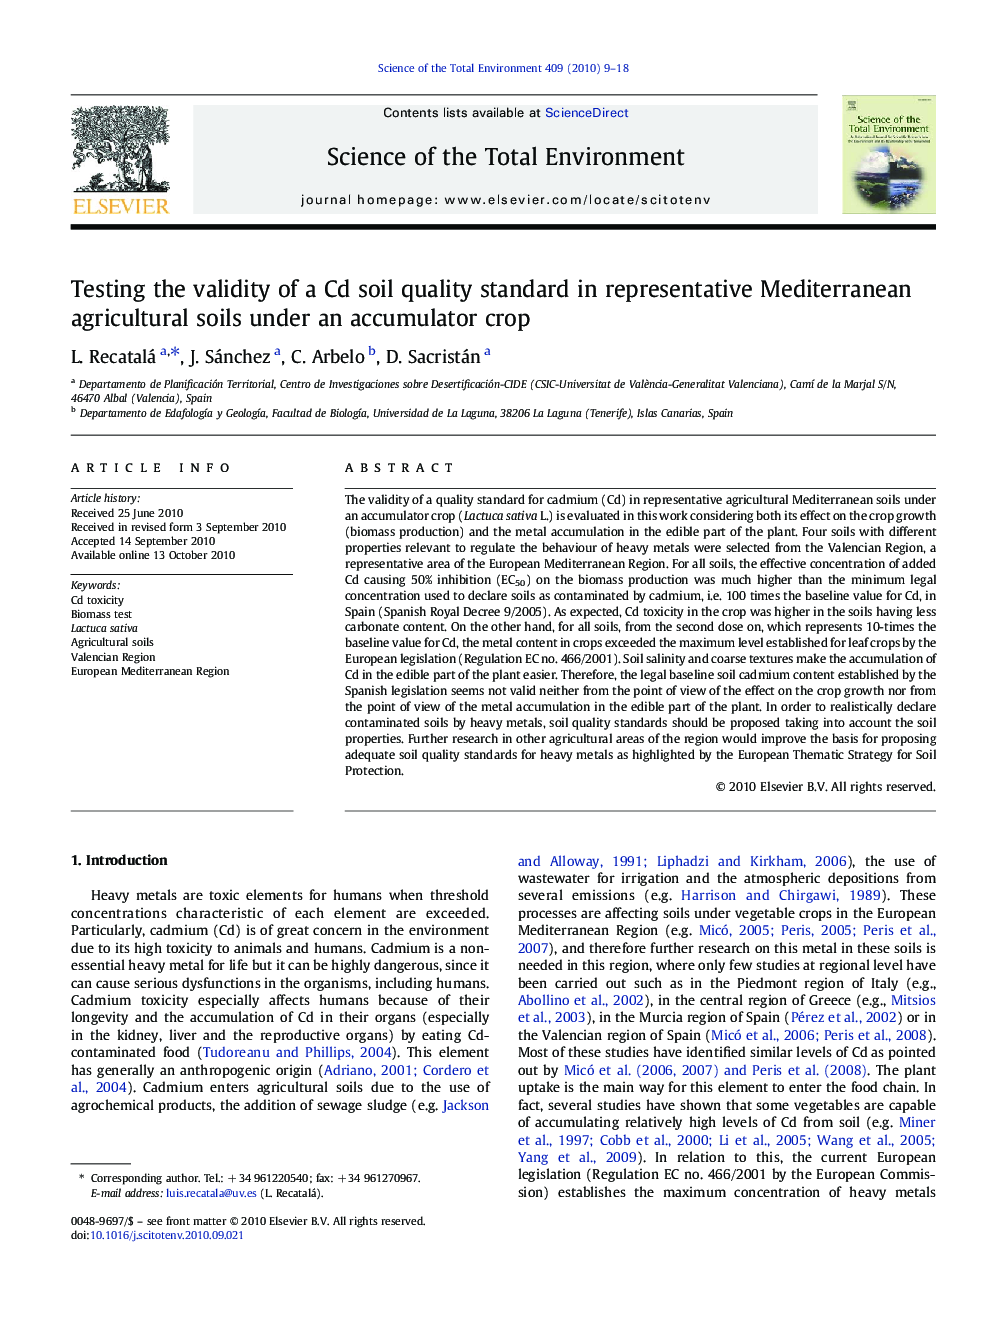 Testing the validity of a Cd soil quality standard in representative Mediterranean agricultural soils under an accumulator crop